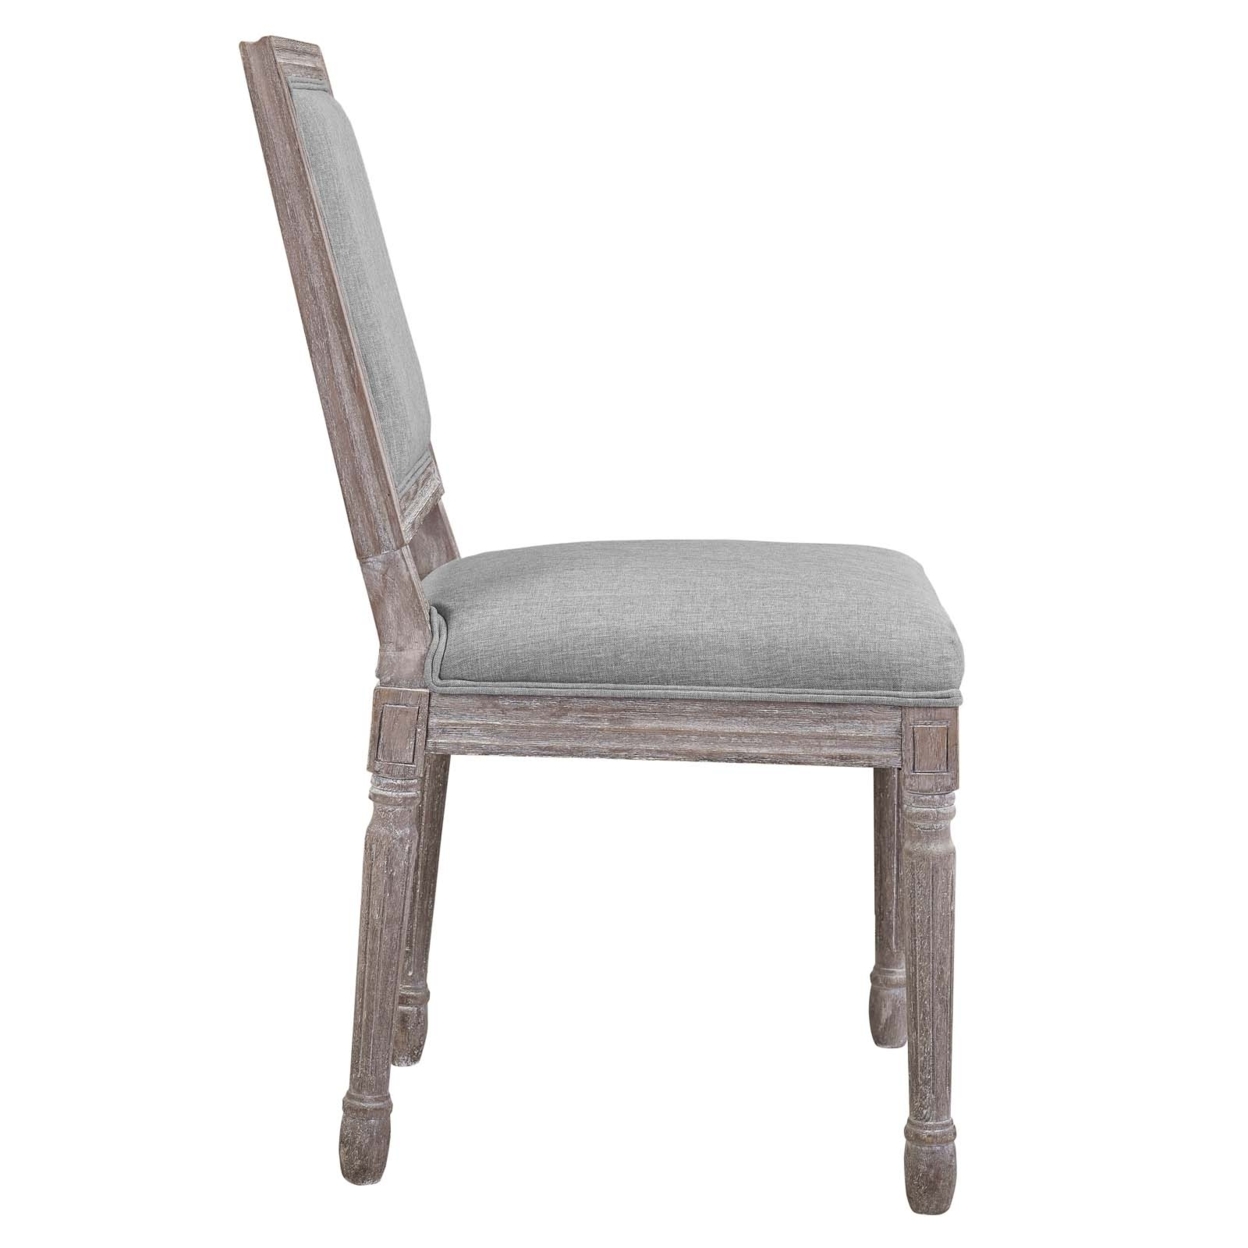 Court Dining Side Chair Upholstered Fabric Set Of 4,Light Gray